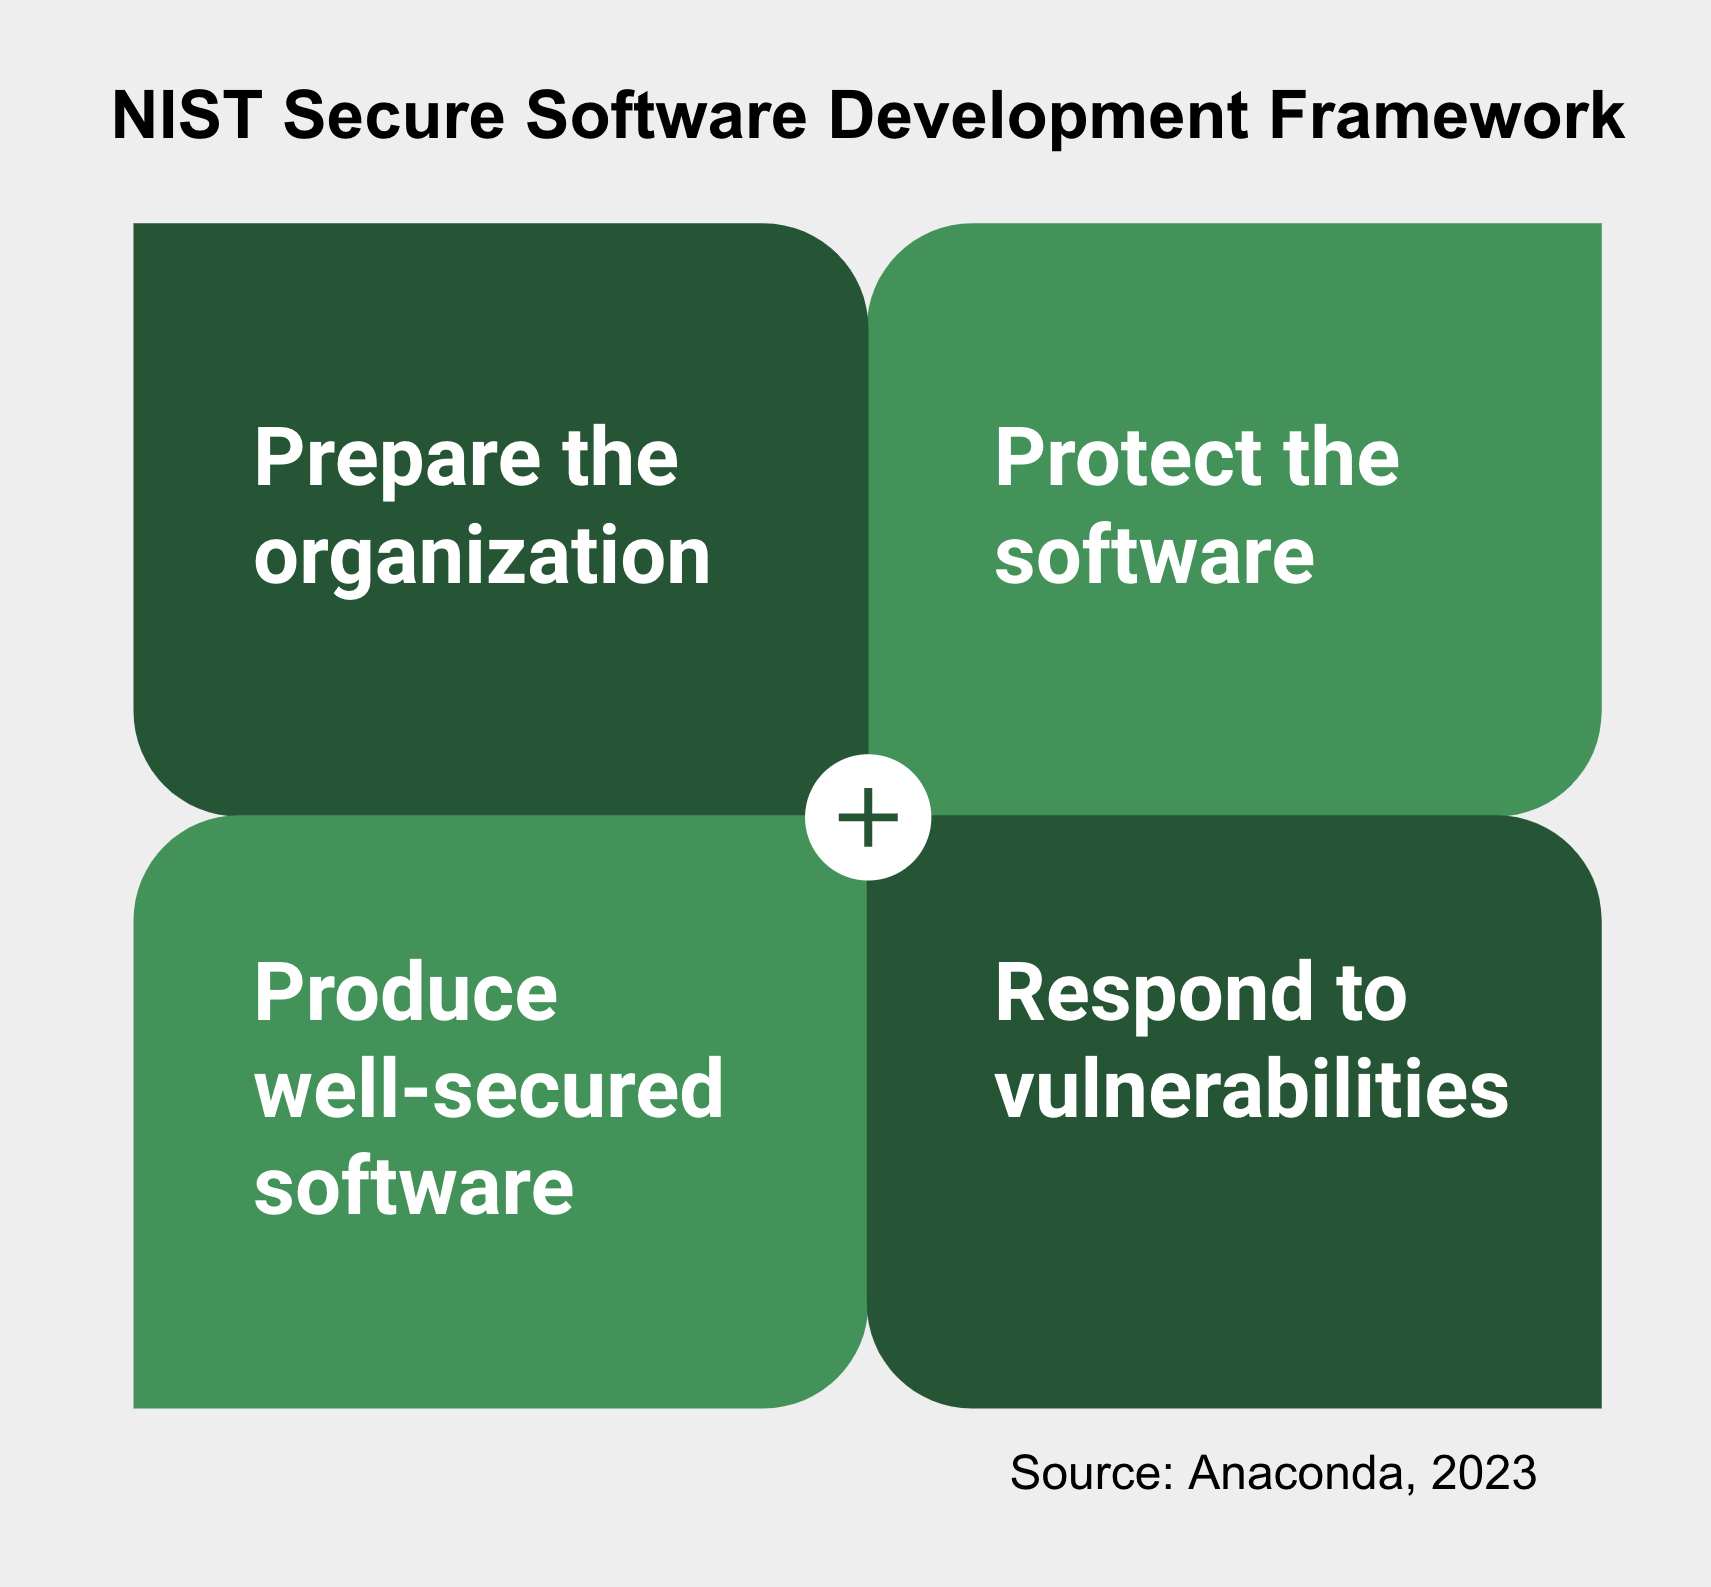 This image lists the four components of the National Institute of Standards and Technology's Secure Software Development Framework, also known as the SSDF. The four components are: 1) Prepare the organization; 2) Protect the software; 3) Produce well-secured software; and 4) Respond to vulnerabilities.